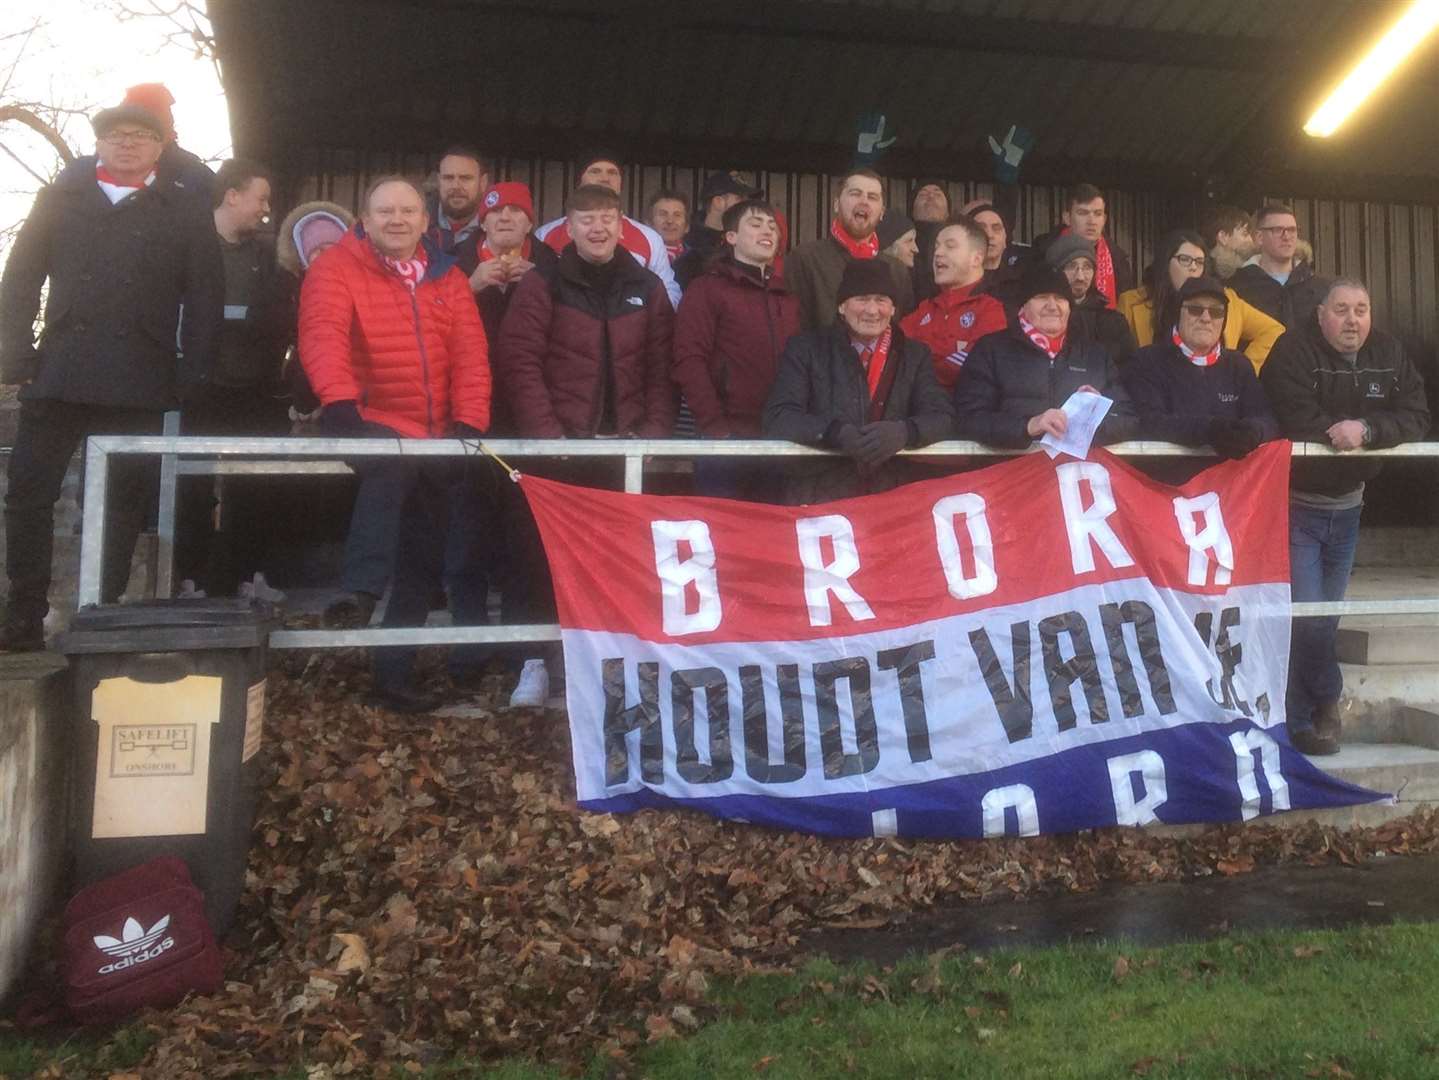 Some of the Brora supporters at the game.